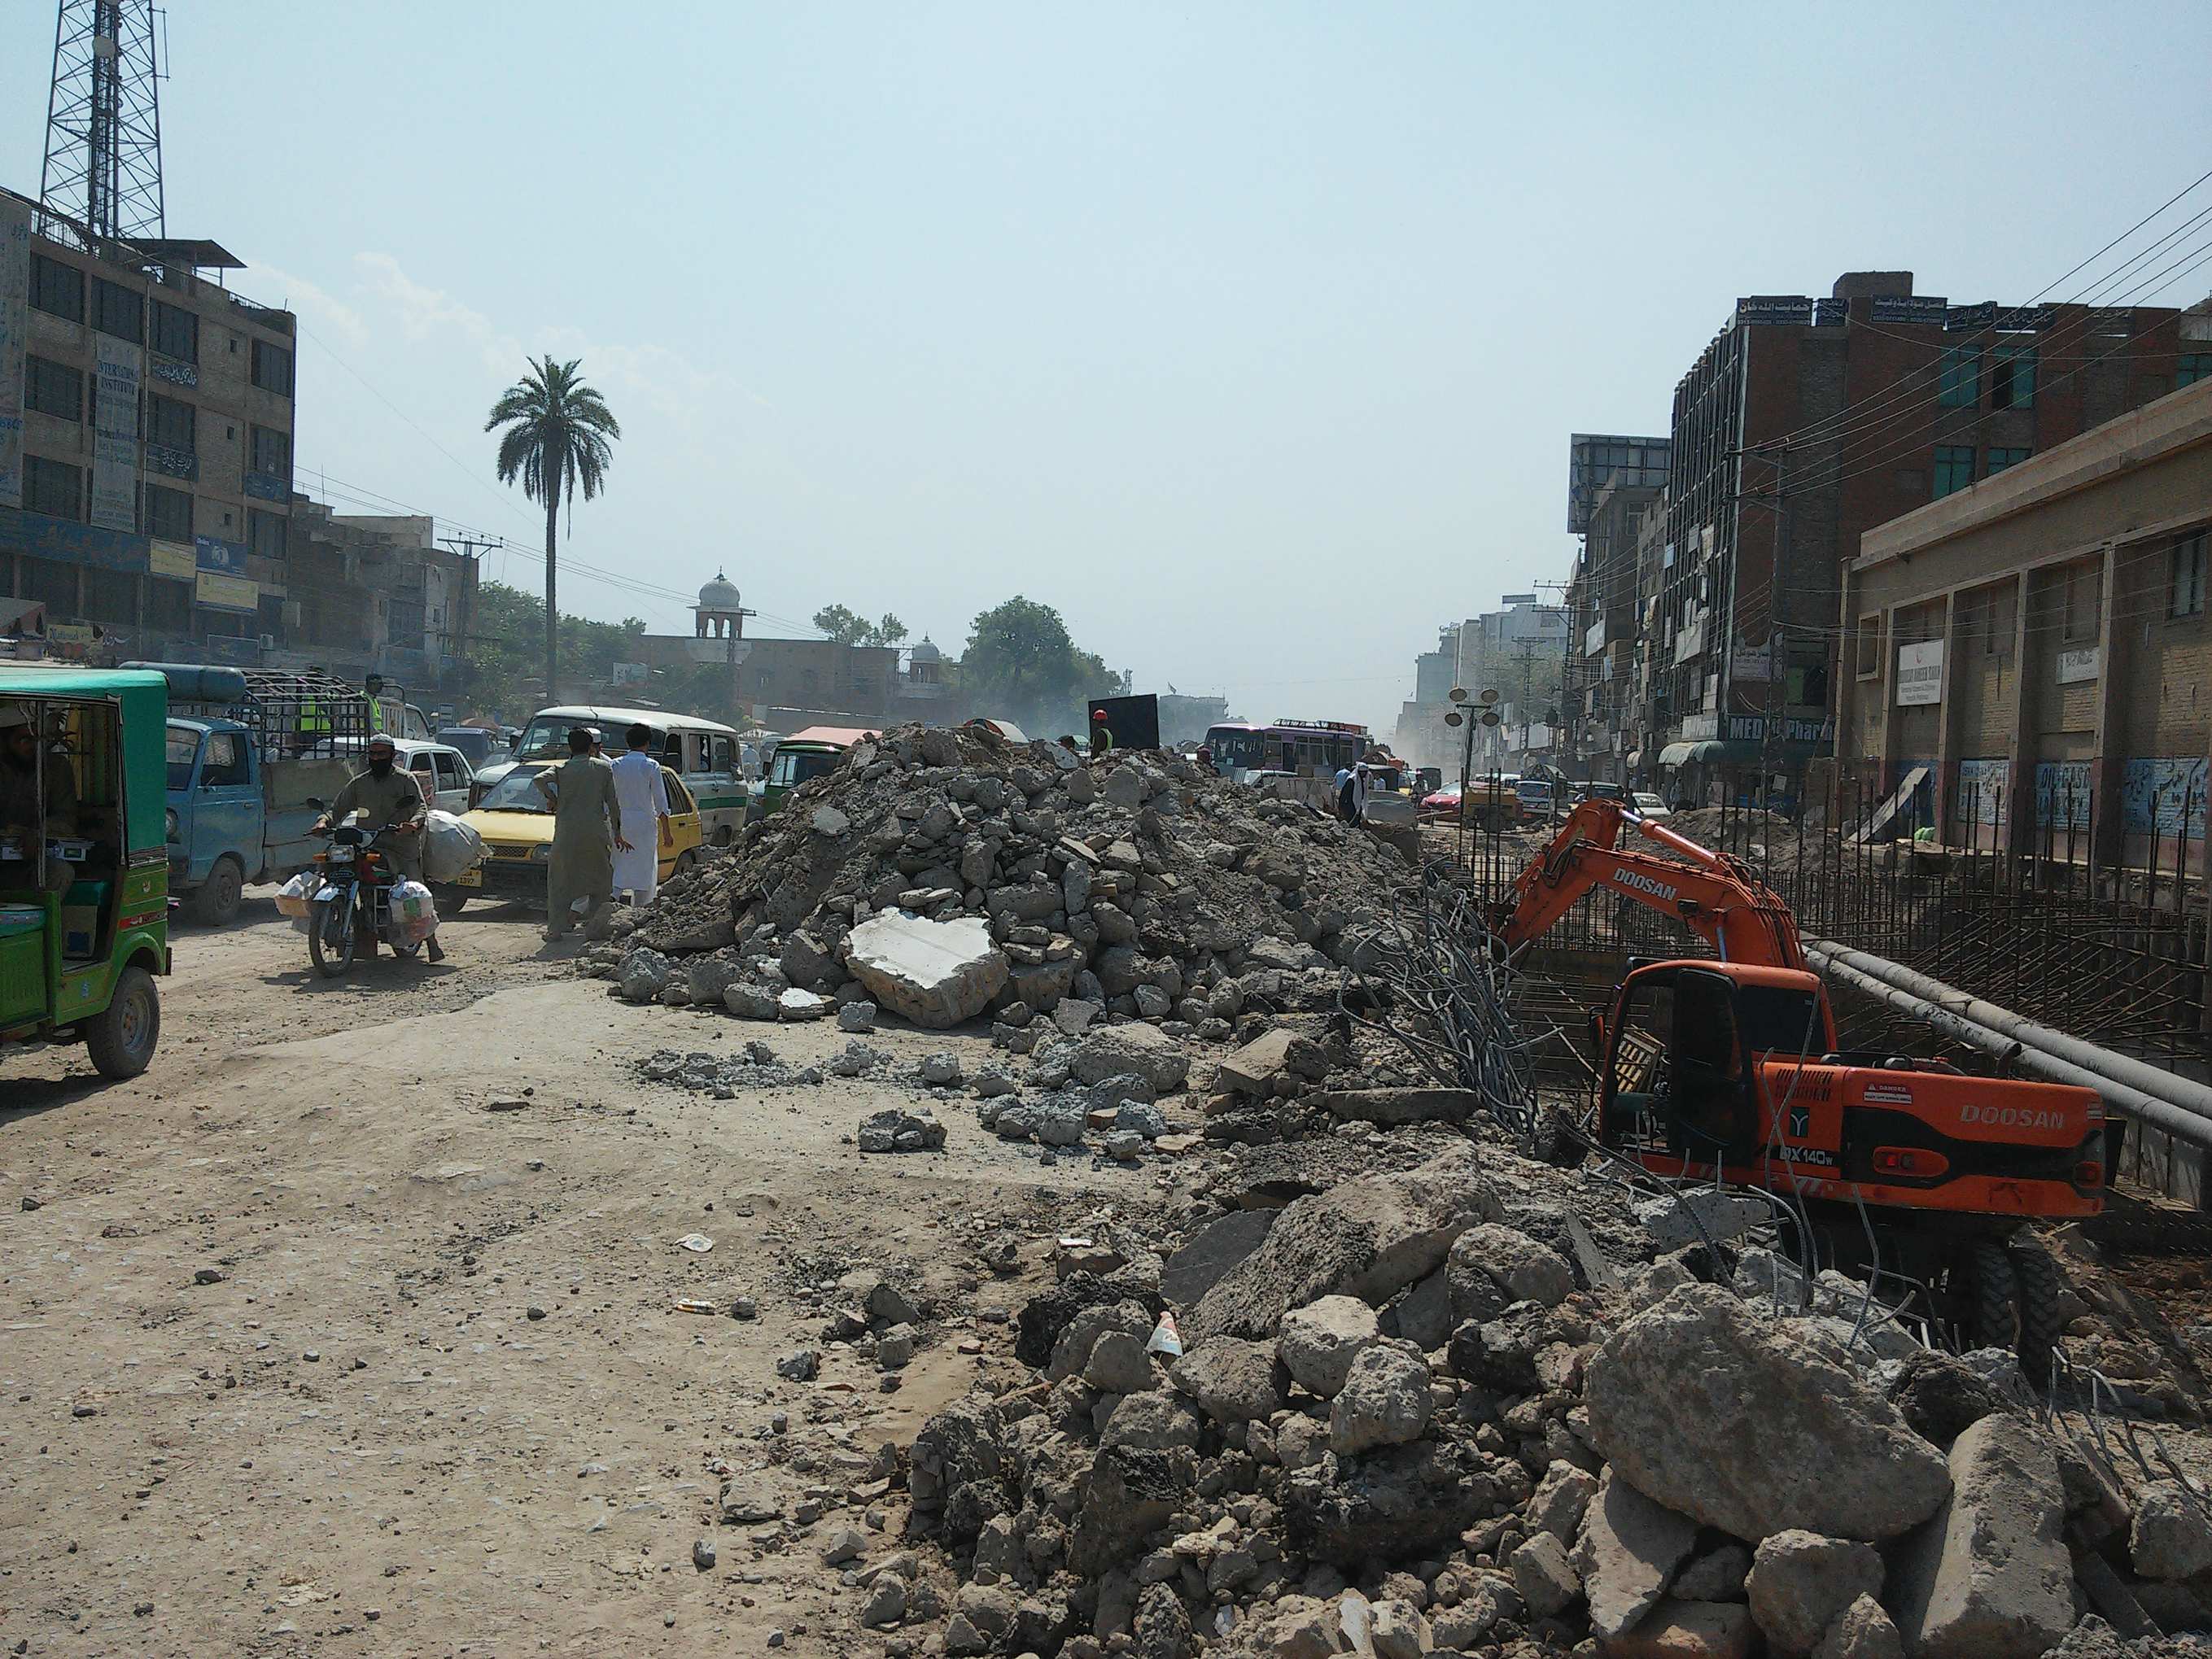 Motorist traveling along a poorly maintained road, exposed to building rubble, construction materials and machinery.